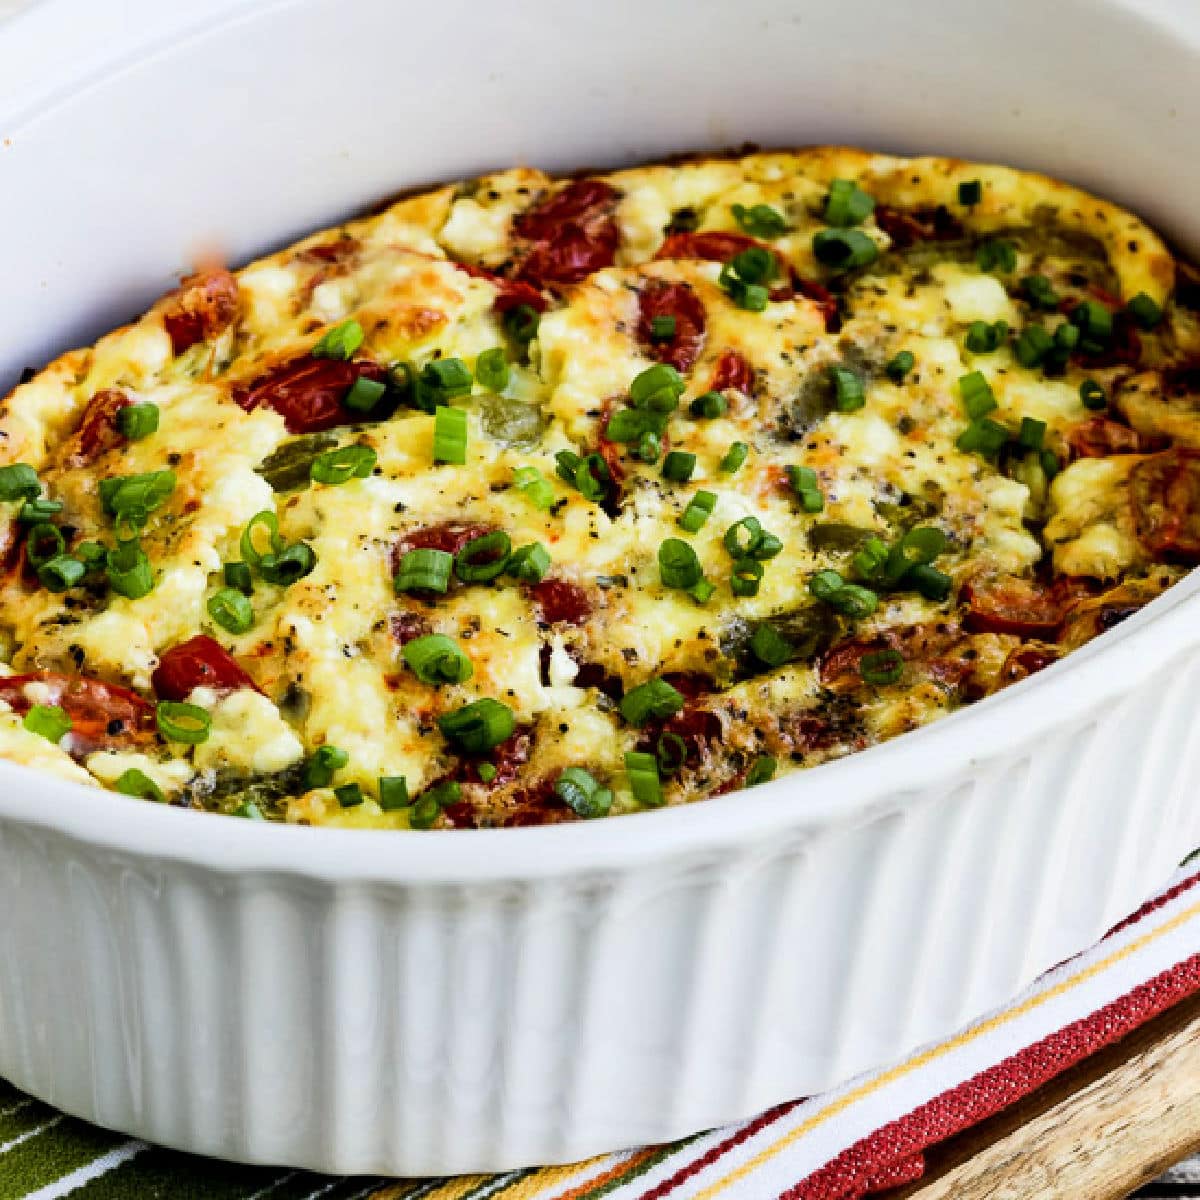 Square image for Vegetable Egg Bake with Peppers, Tomatoes, and Feta shown in baking dish.